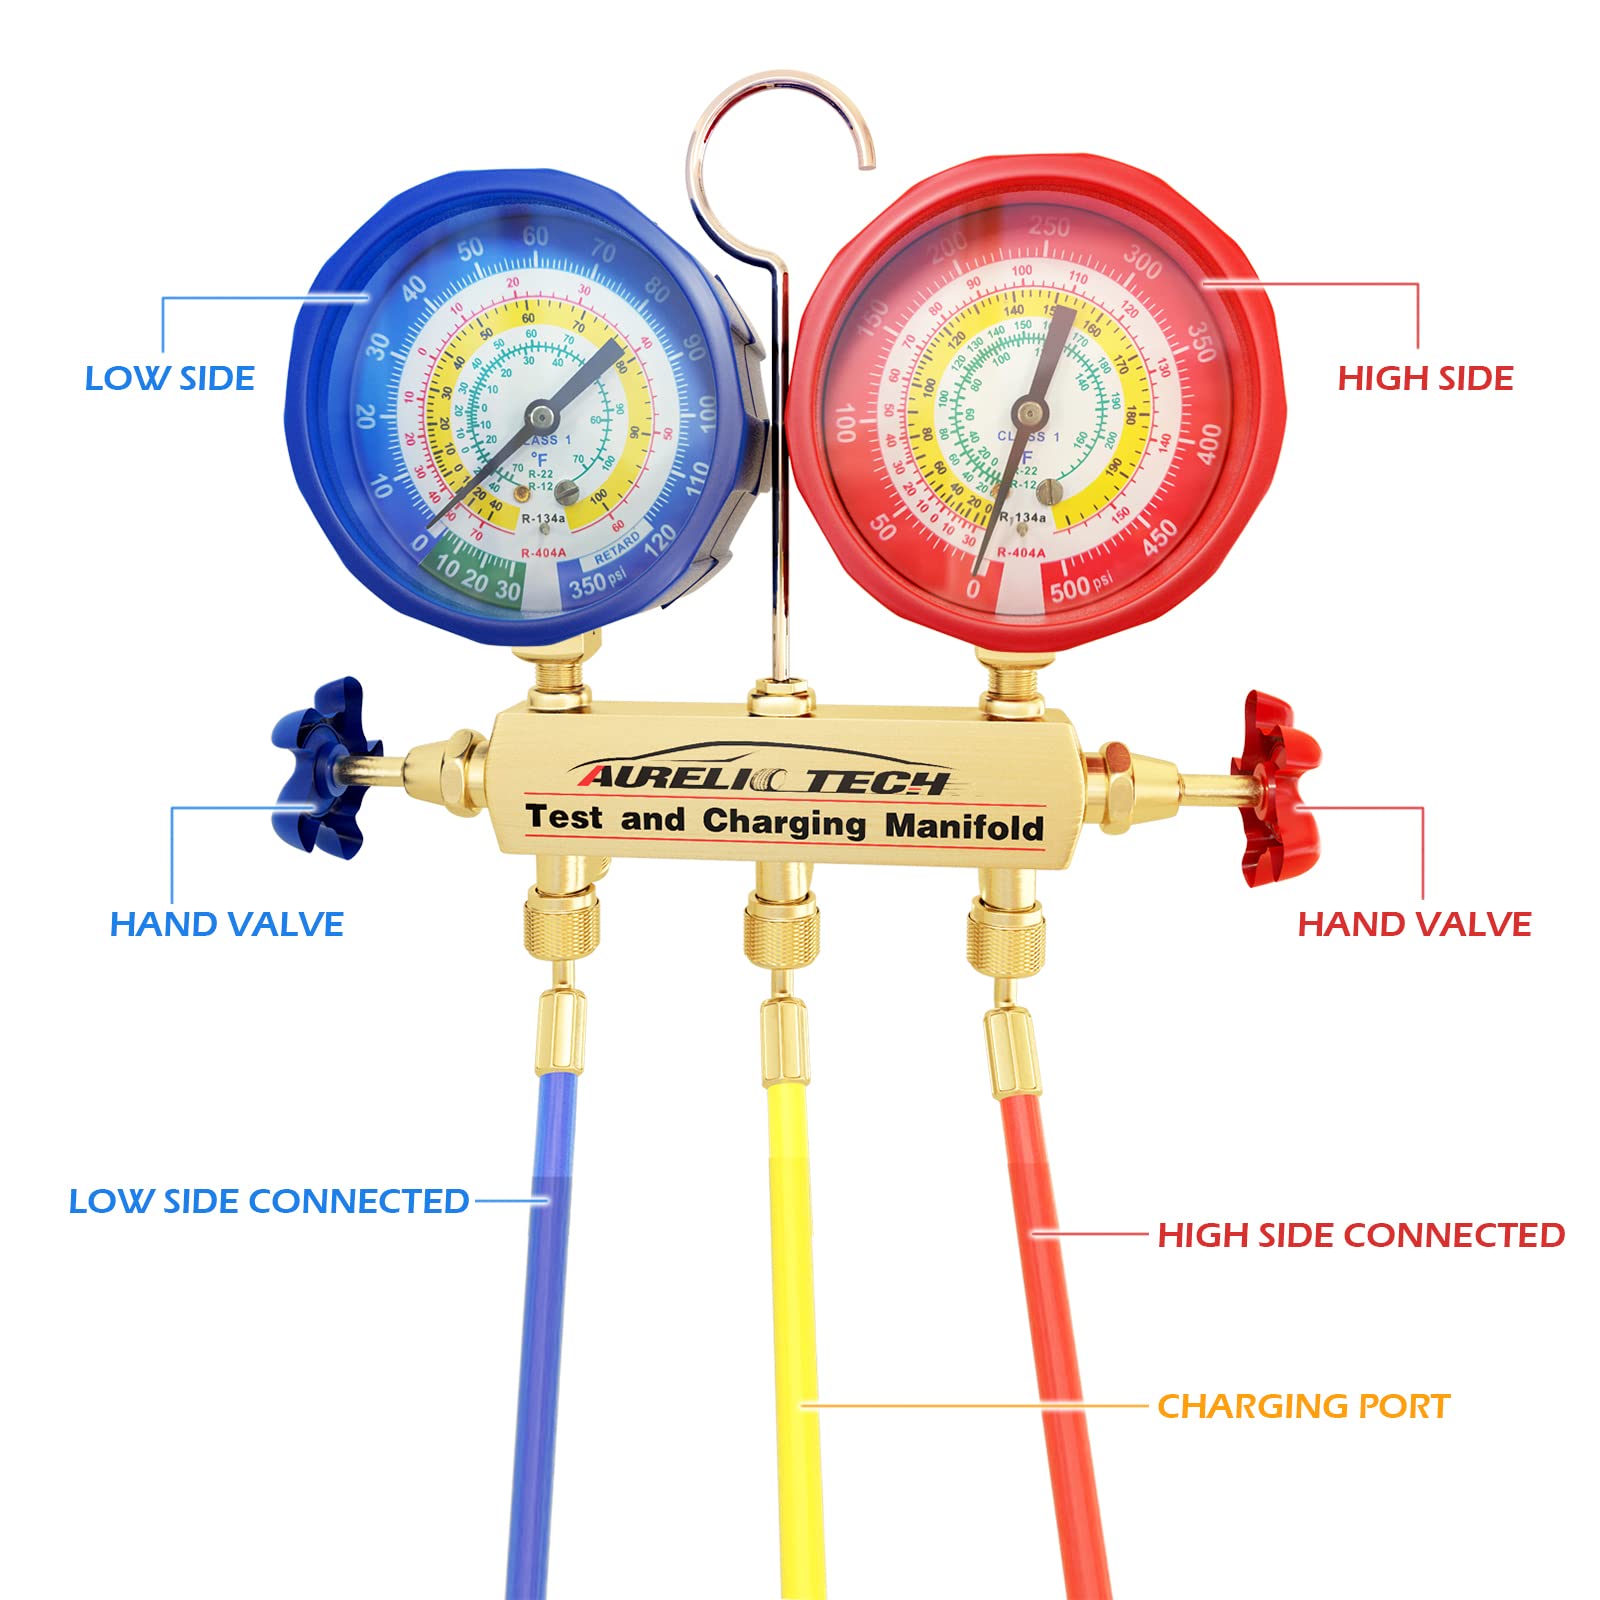 Mua AURELIO TECH Way A/C Diagnostic Manifold Gauge Set, Fits R134A R12 R22  and R502 Refrigerants, with 5FT Hose, Acme Tank Adapters, Adjustable  Couplers and Can Tap, 2023 Leak-Proof Upgrade Version